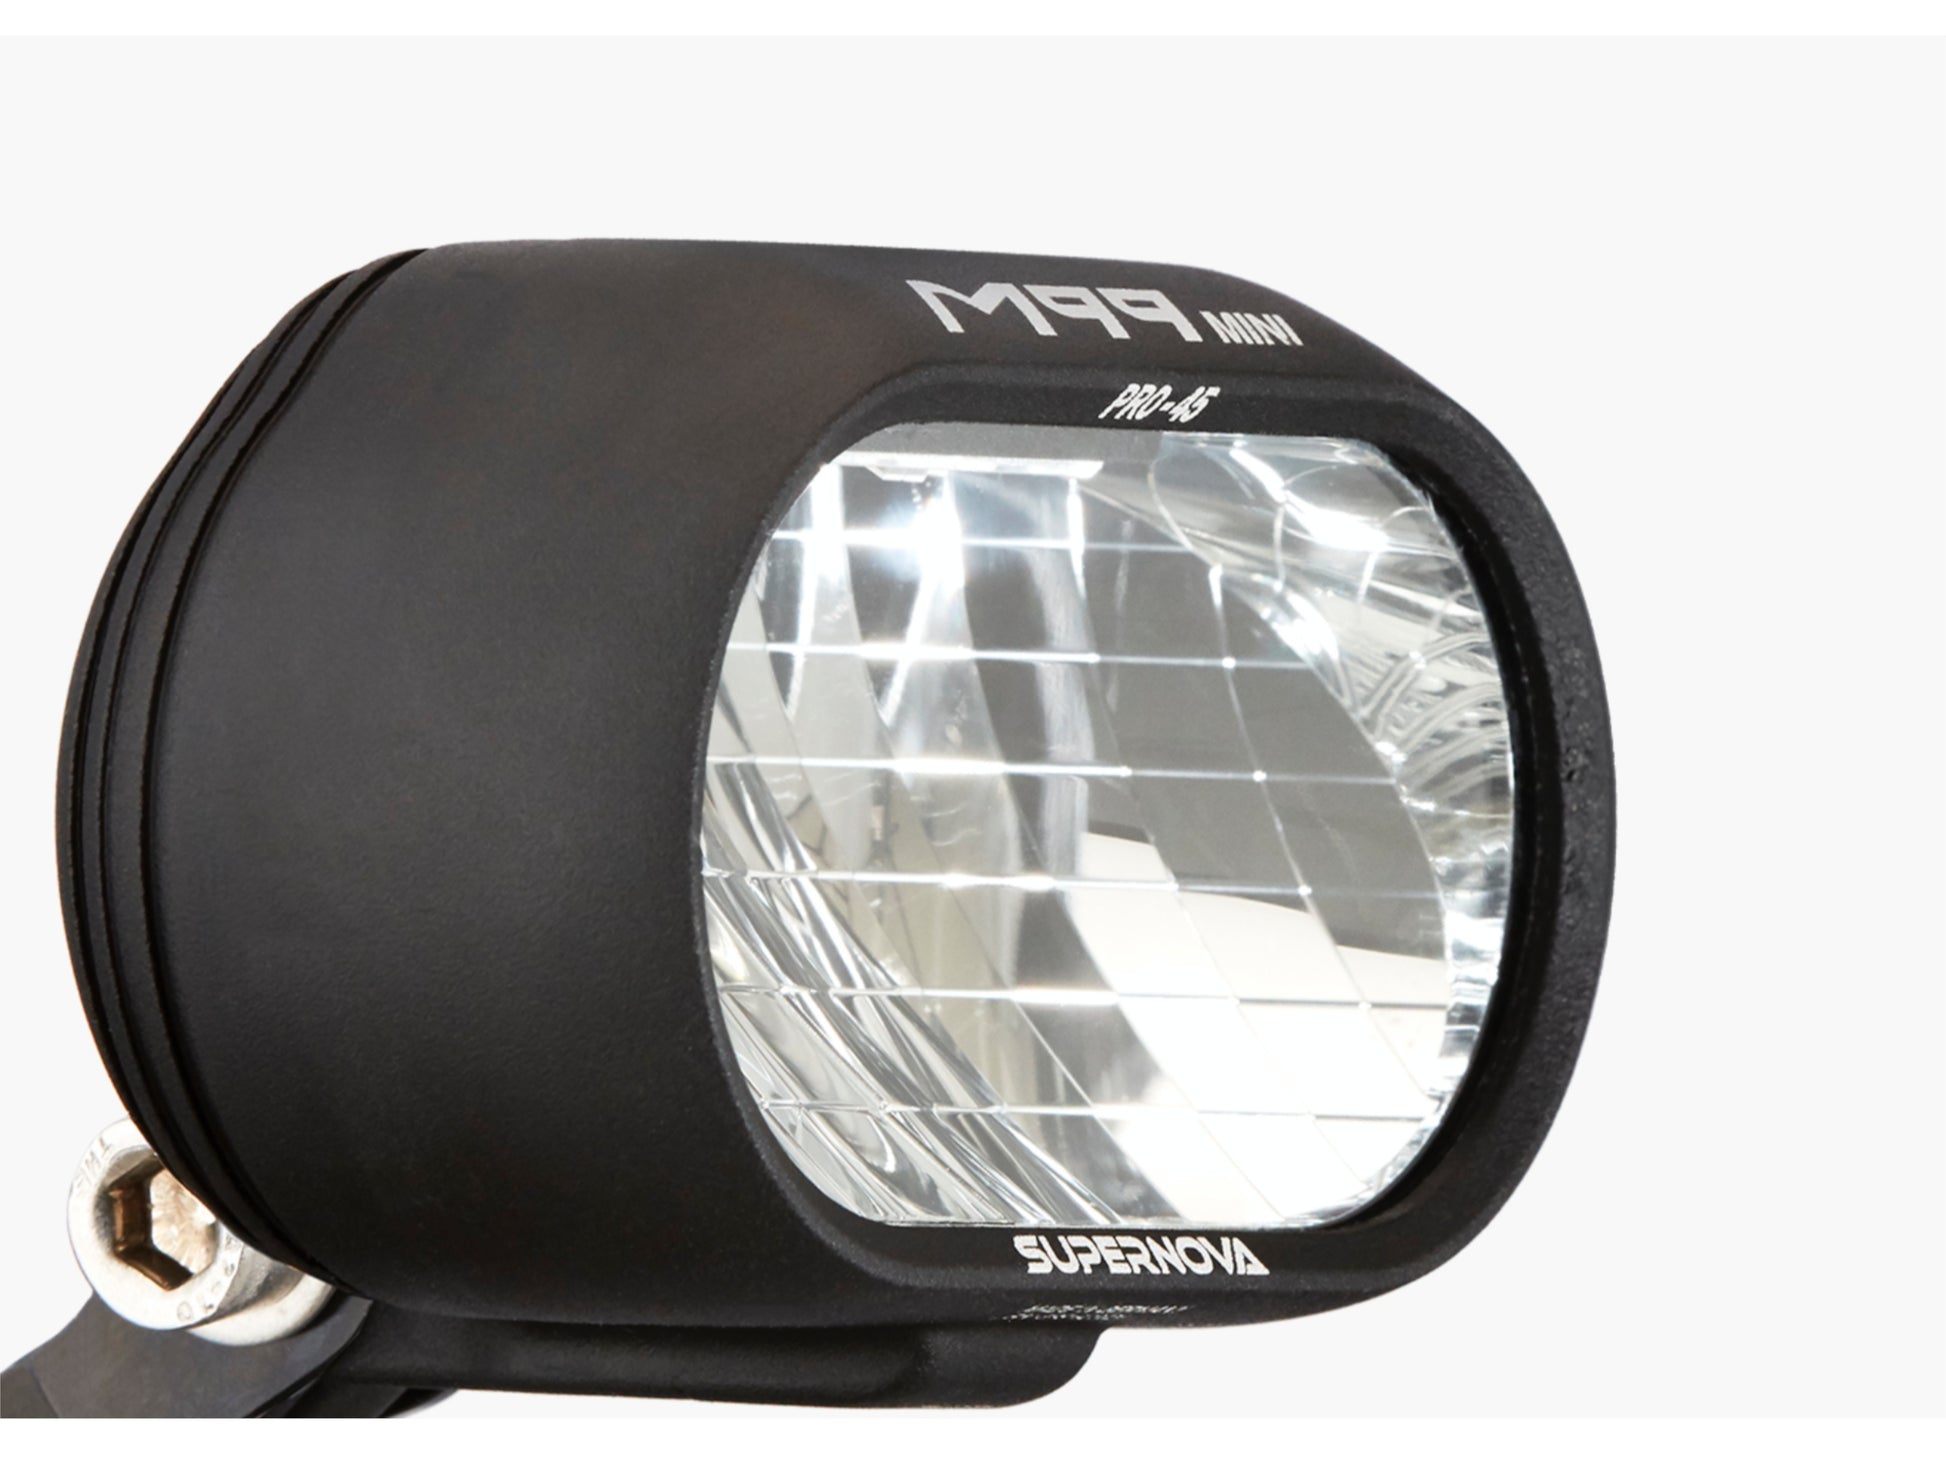 Riese and Muller Load 60 Touring eMTB full suspension close up Supernova M99 headlight